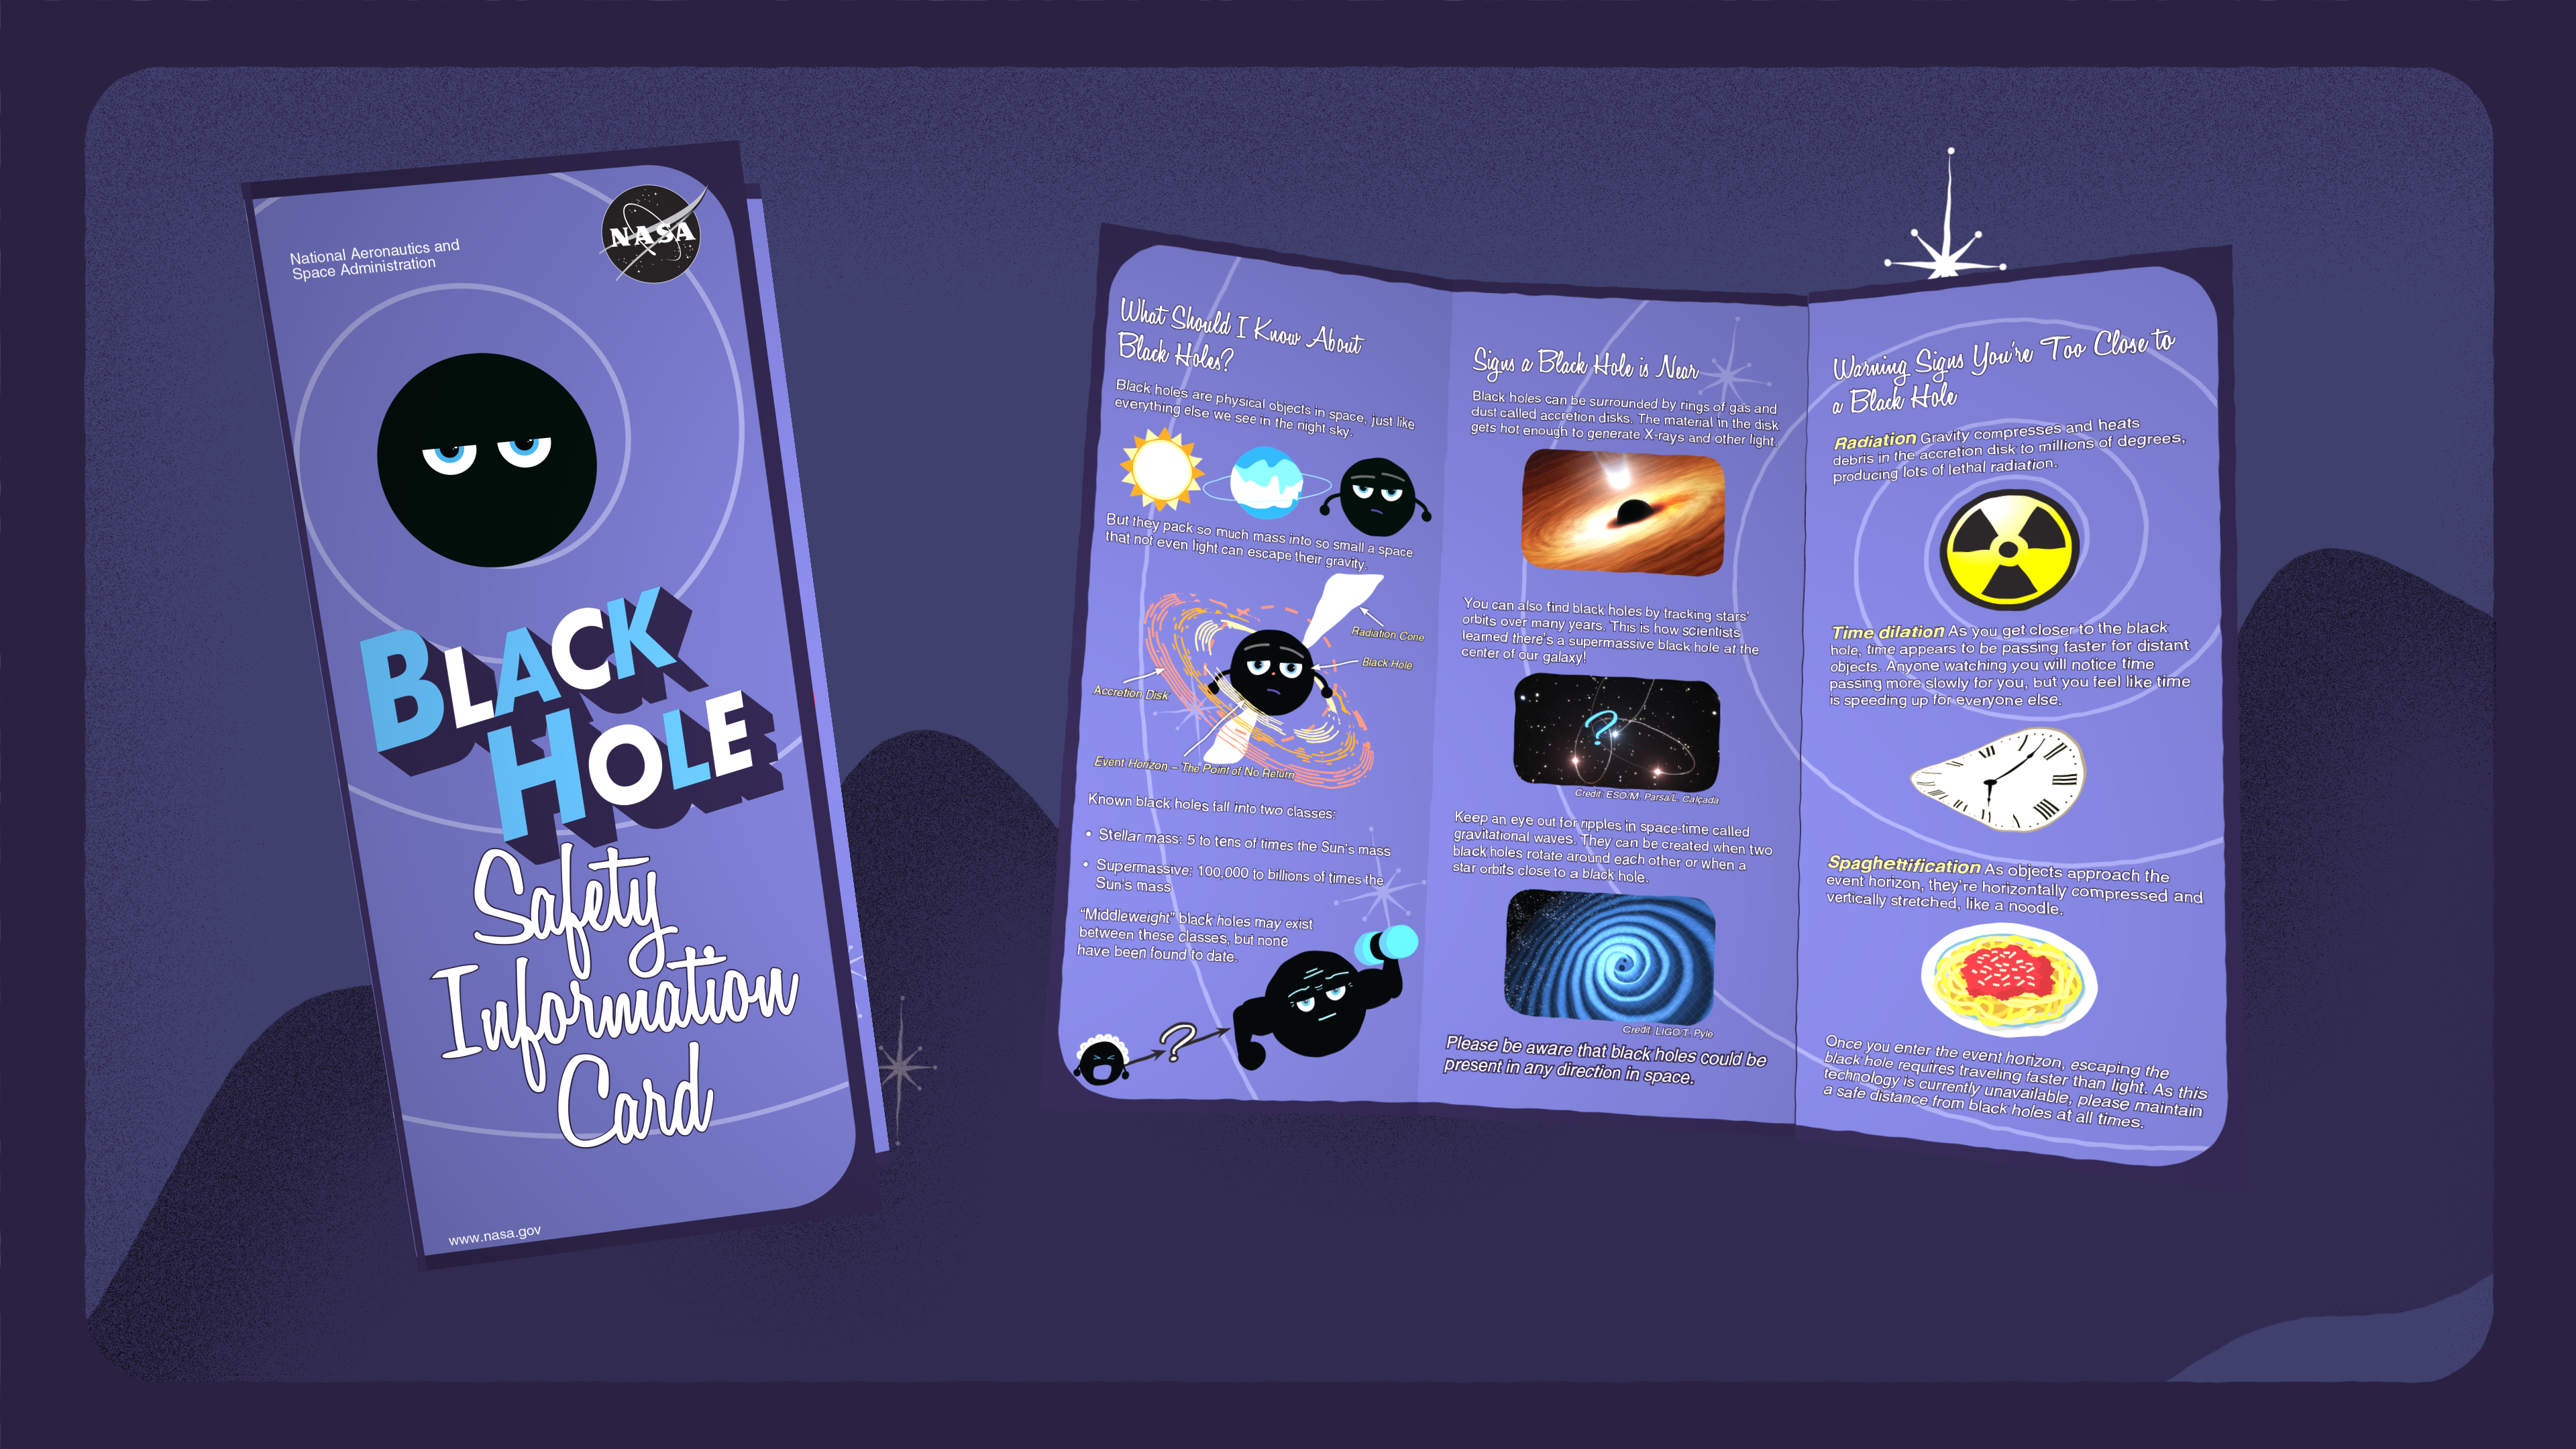 Safety BrochureAlso found in your spacesuit pocket, this helpful brochure will give you all the tips, tricks, and facts you'll need for your next (inadvisable) black hole vacation! Download the brochure using the links below.Download a printable version here.Download a web version here.Credit: NASA's Goddard Space Flight CenterA Spanish-language is also available below.